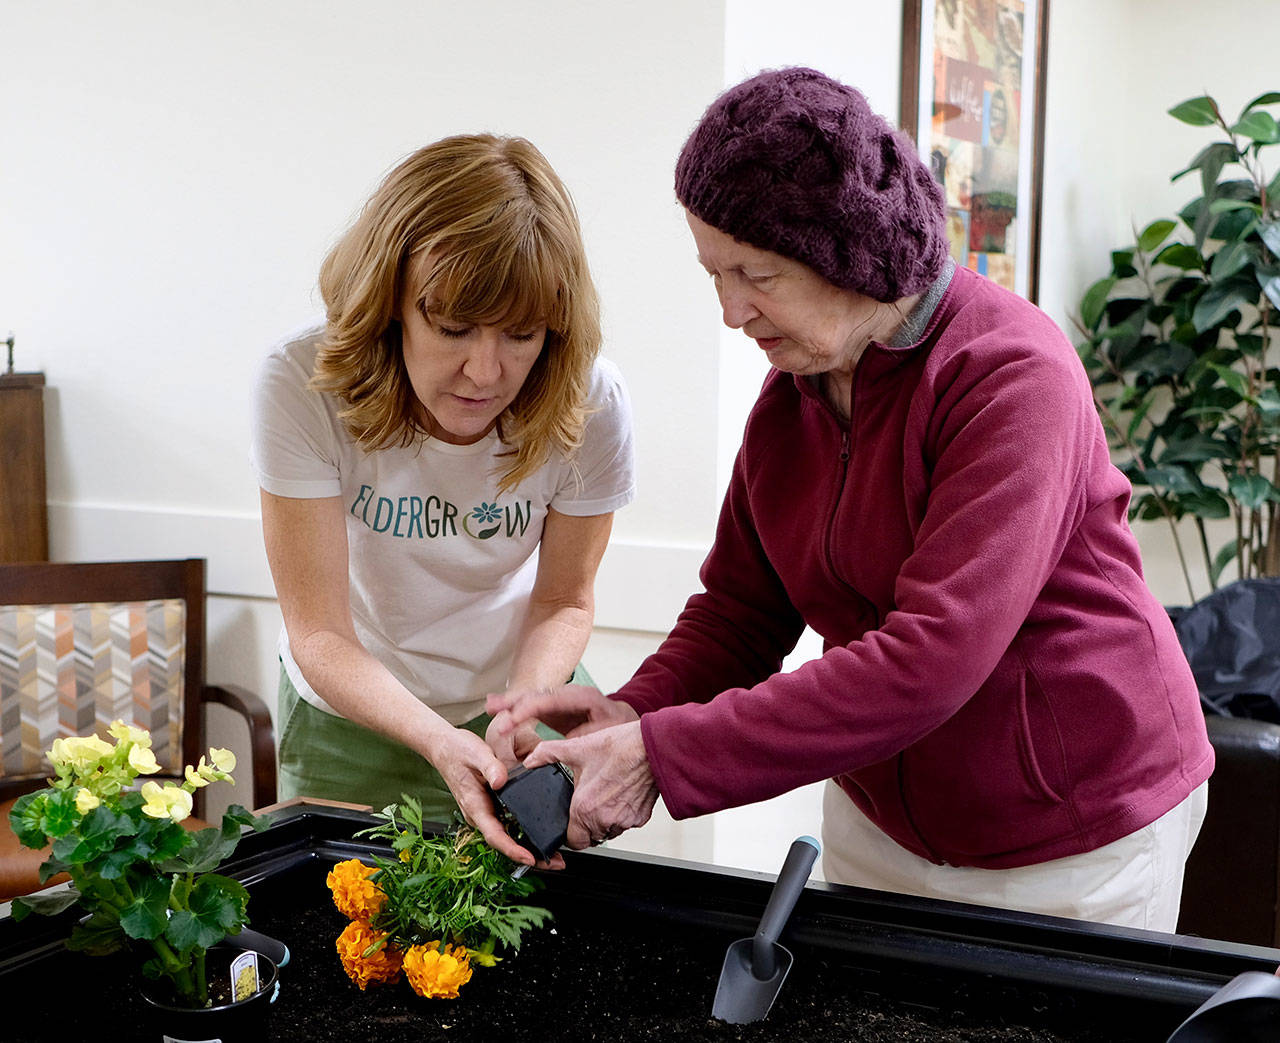 Eldergrow’s educators will teach and build relationships with residents through ongoing enrichment classes on horticulture, culinary and garden art. COURTESY PHOTO, Kevin Knox